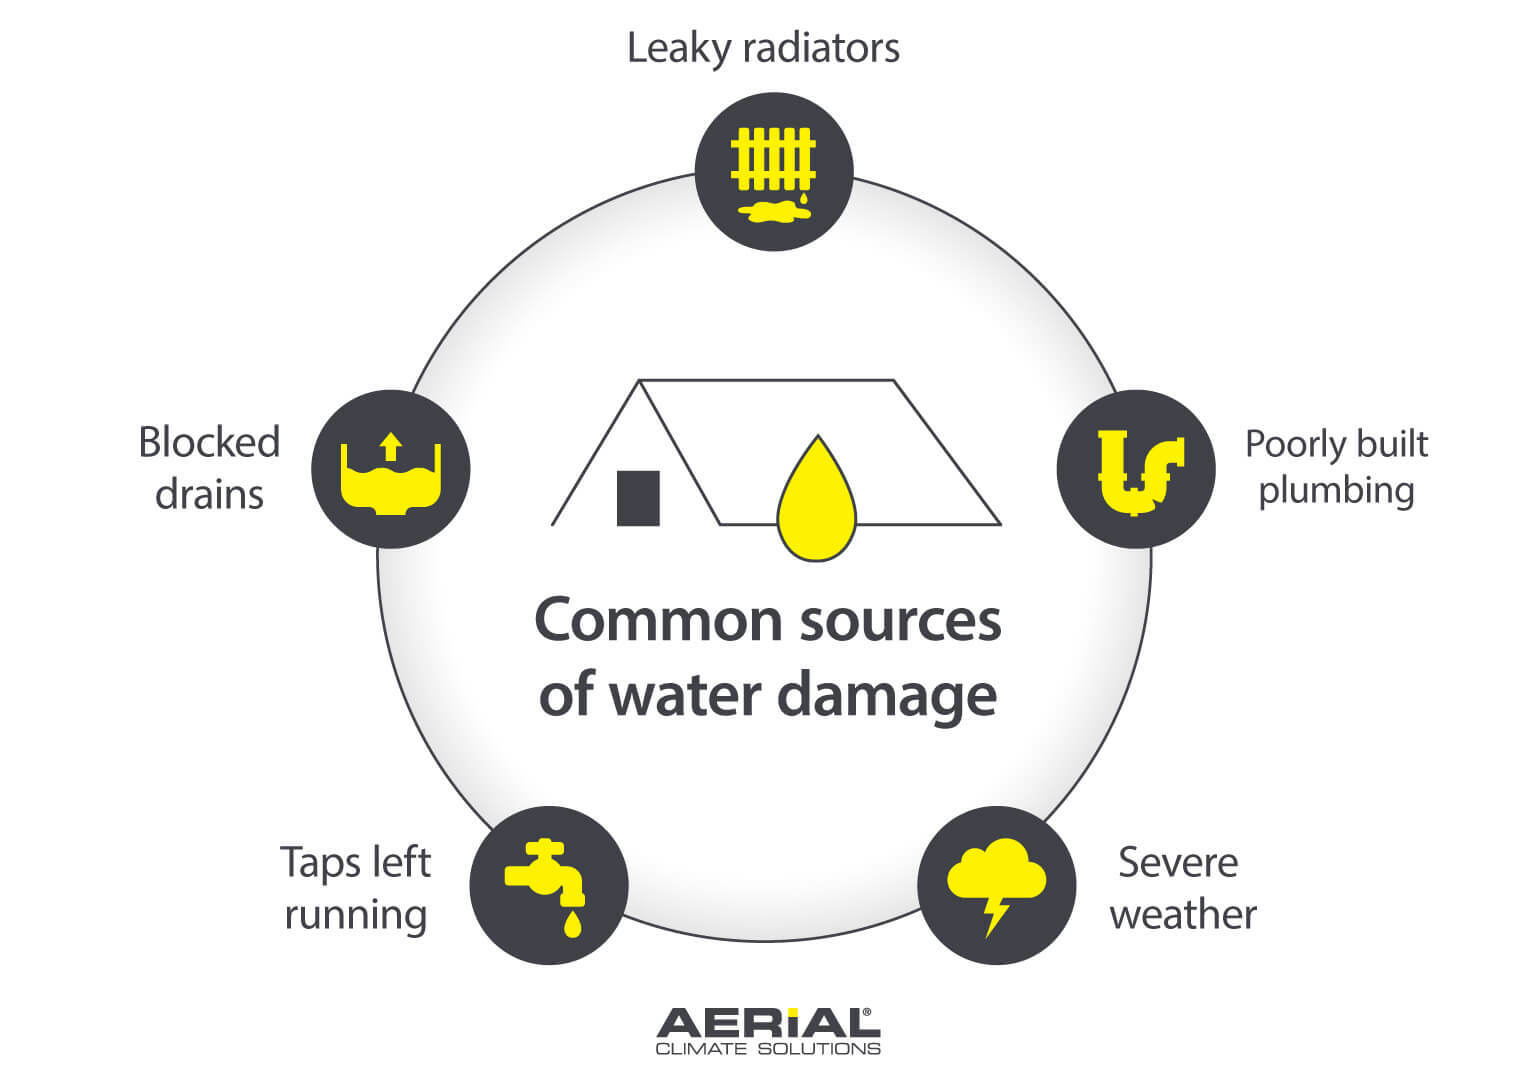 An Infographic illustrating 5 Common sources of water damage including: leaky radiators, poorly built plumbing, severe weather, taps left running, and blocked drains